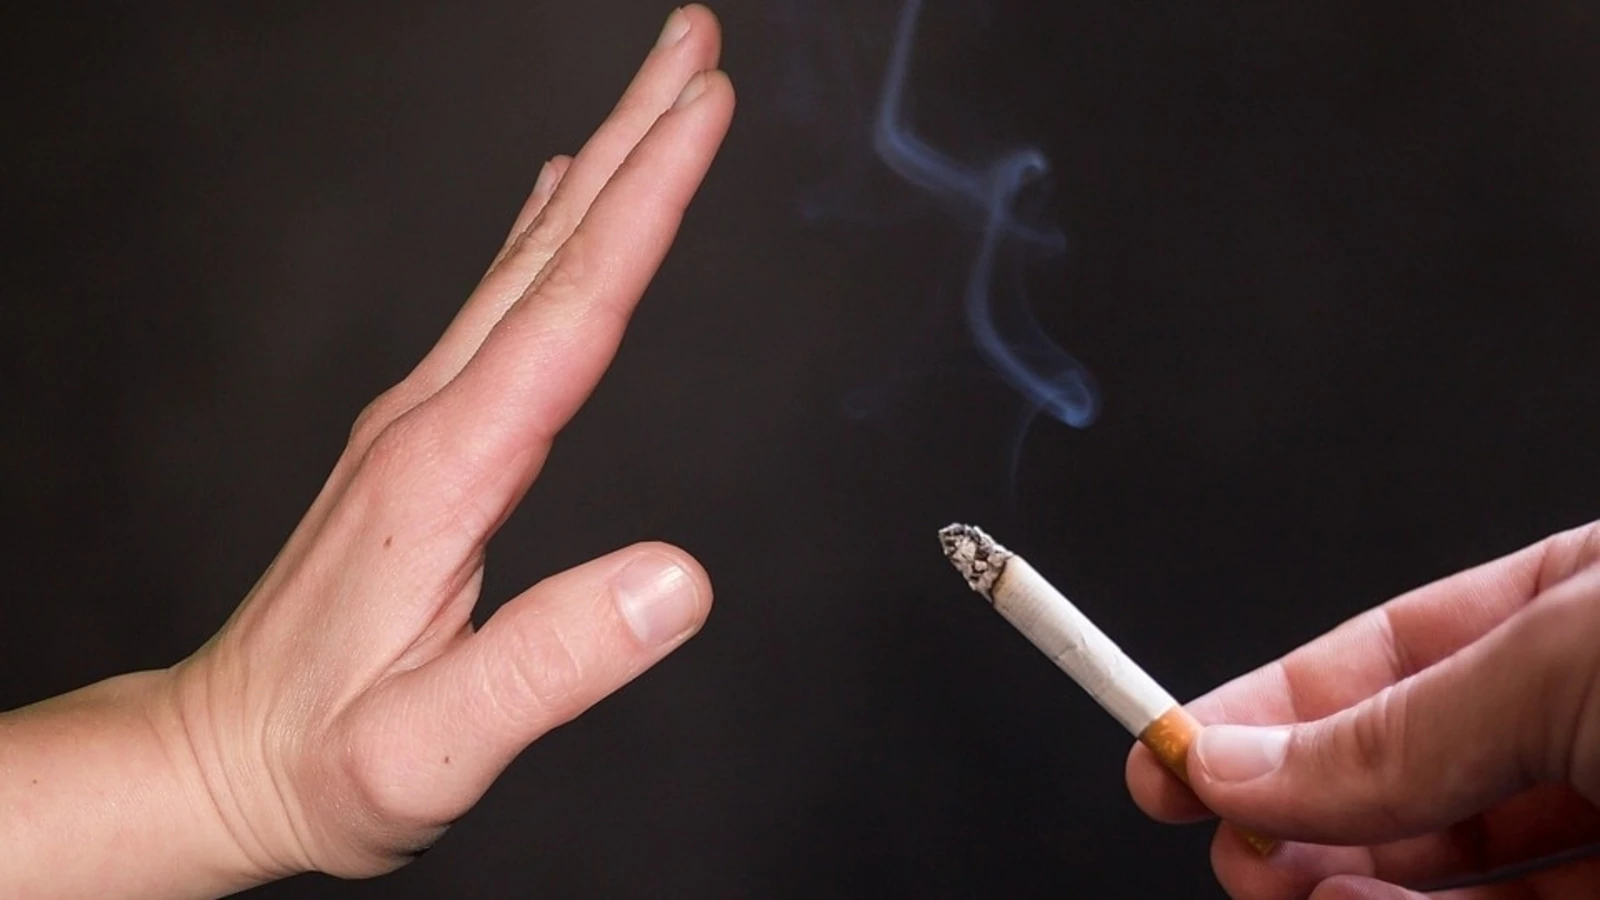 You Can Give Up Smoking With These Pointers